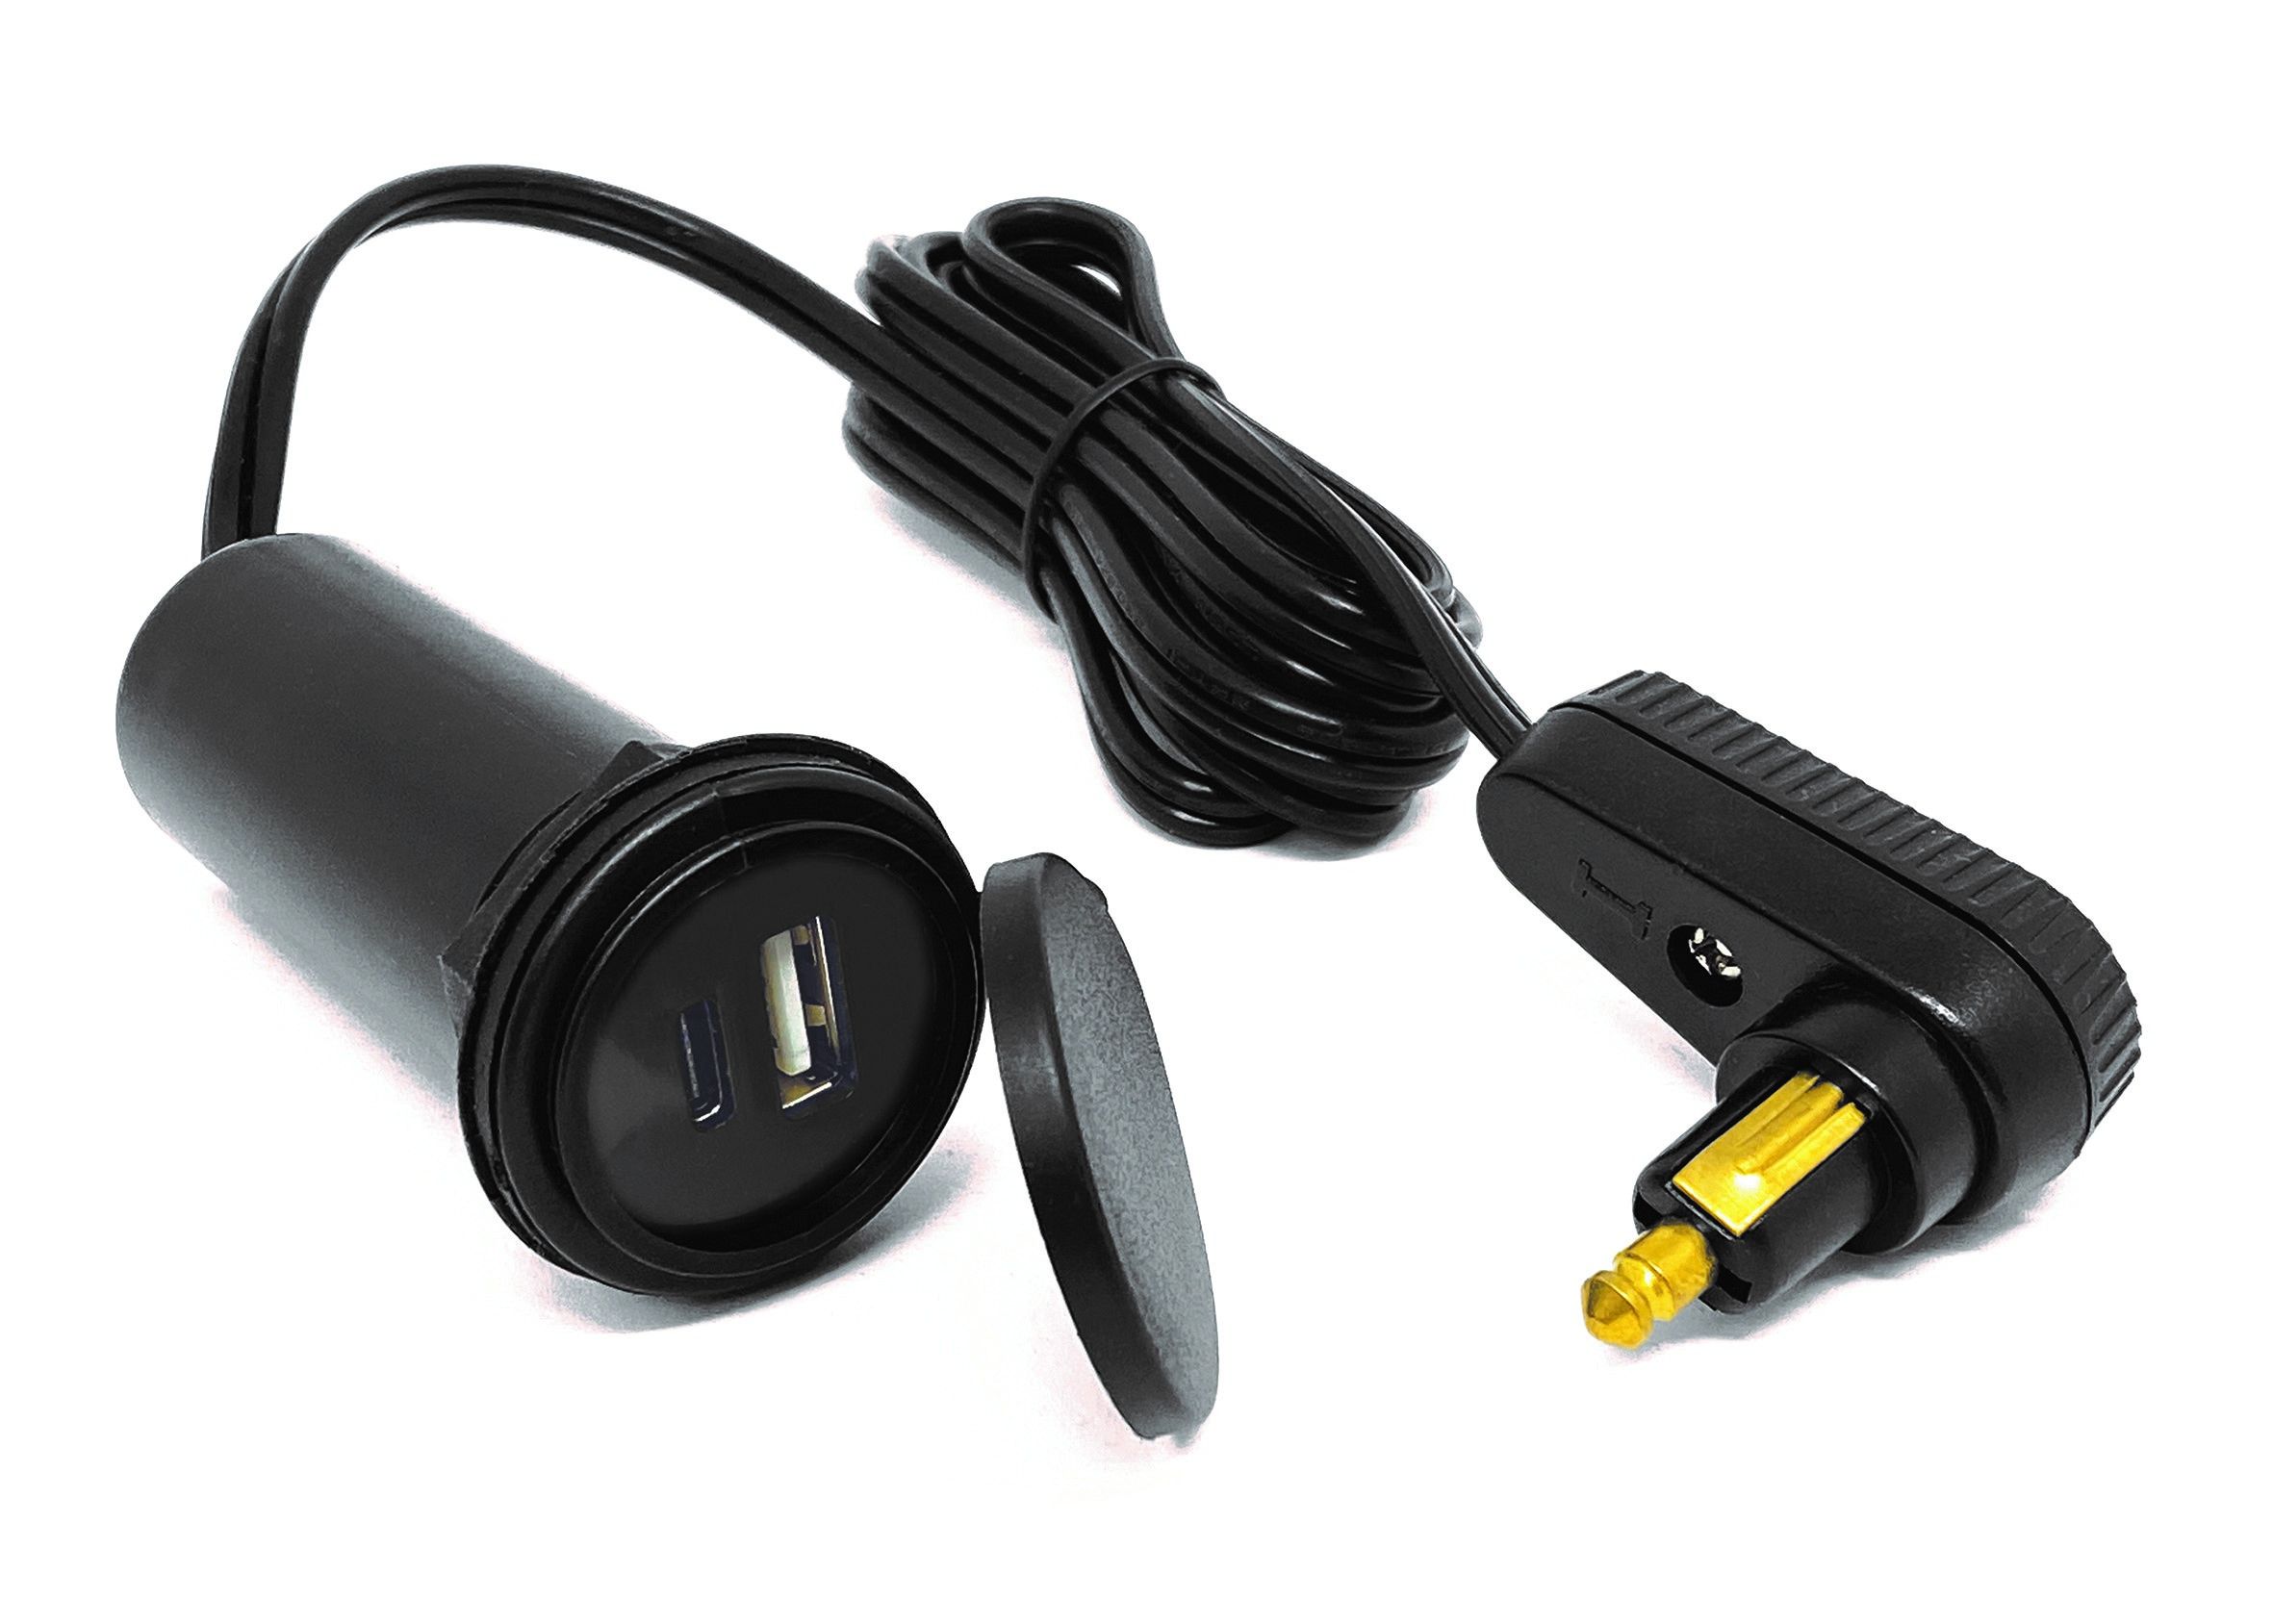 DIN-ADAPTER MIT ZWEI USB-BUCHSEN, Charge and utility, Accessories